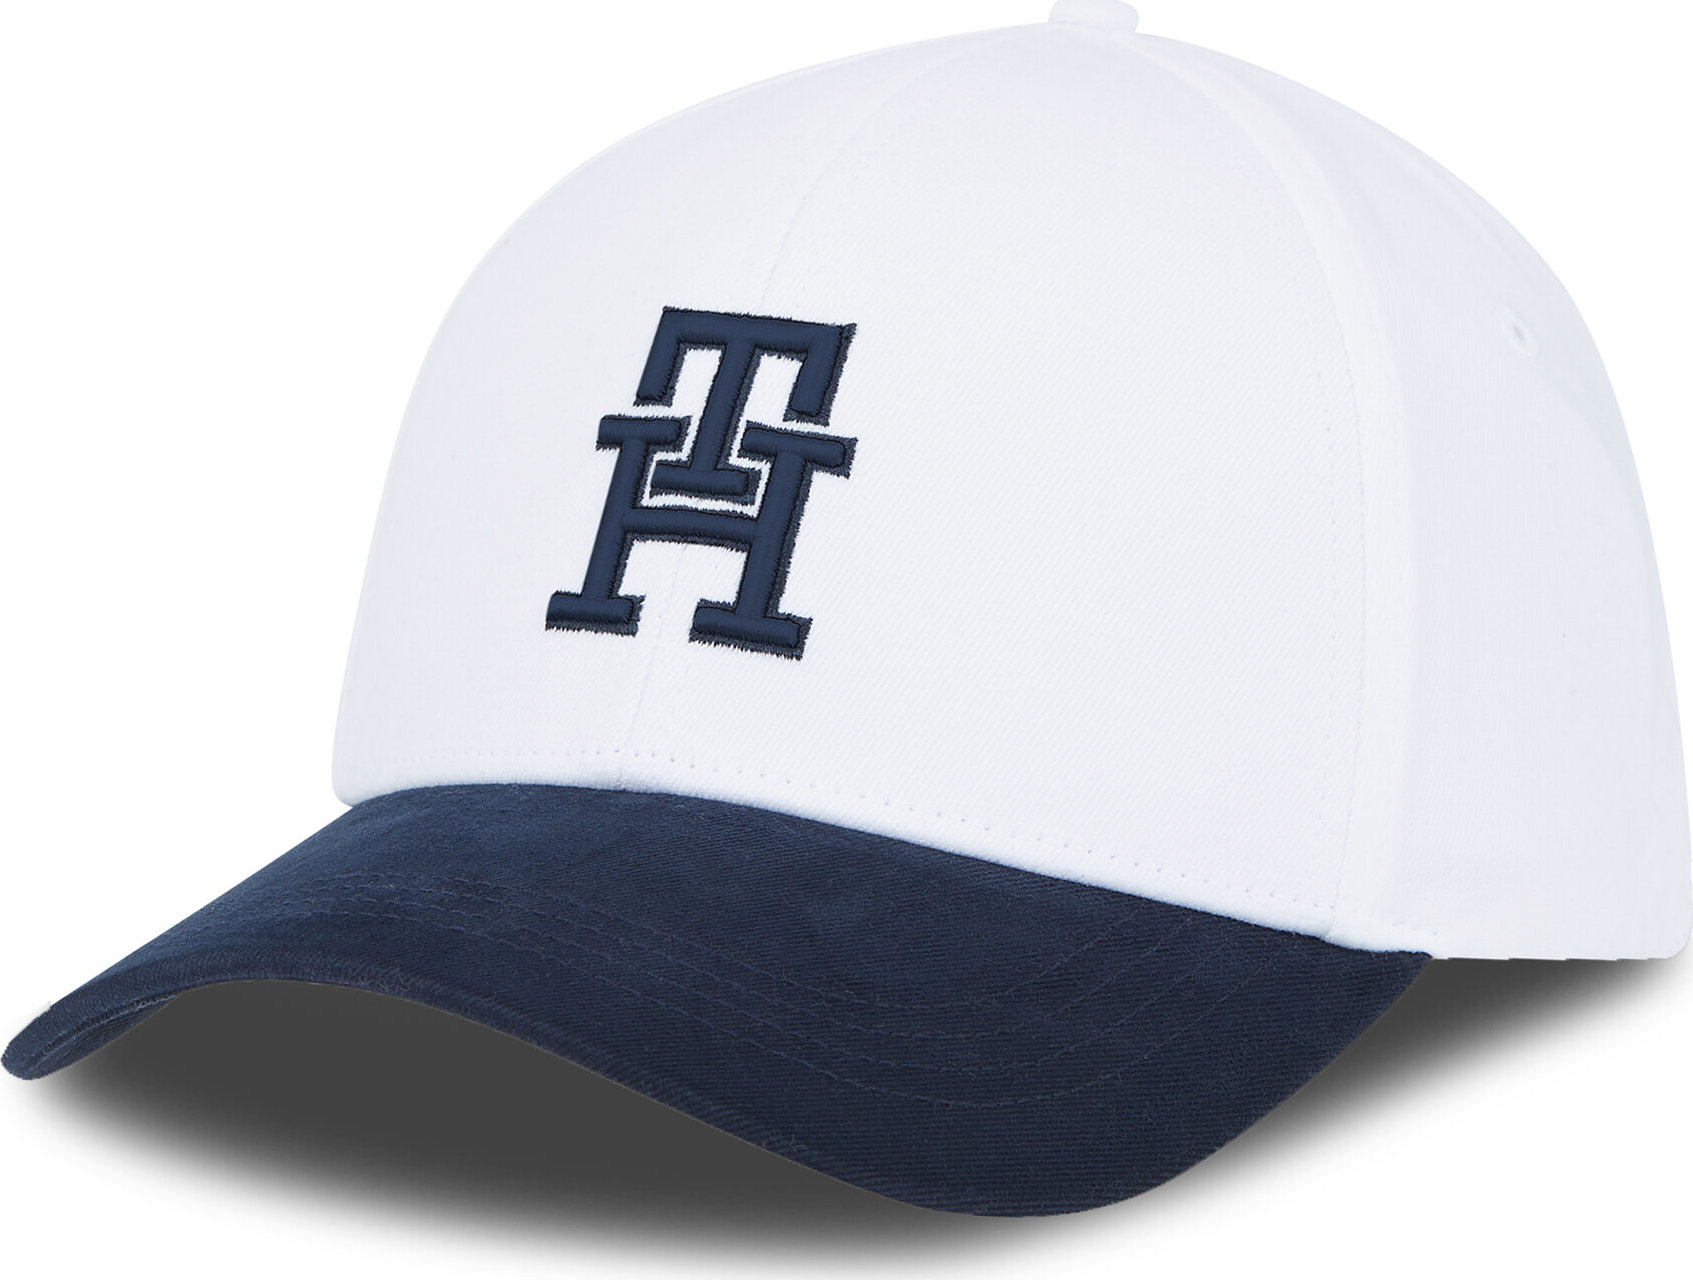 Kšiltovka Tommy Hilfiger Th Imd Brushed 6 Panel Cap AM0AM12301 White/ Space Blue YCF